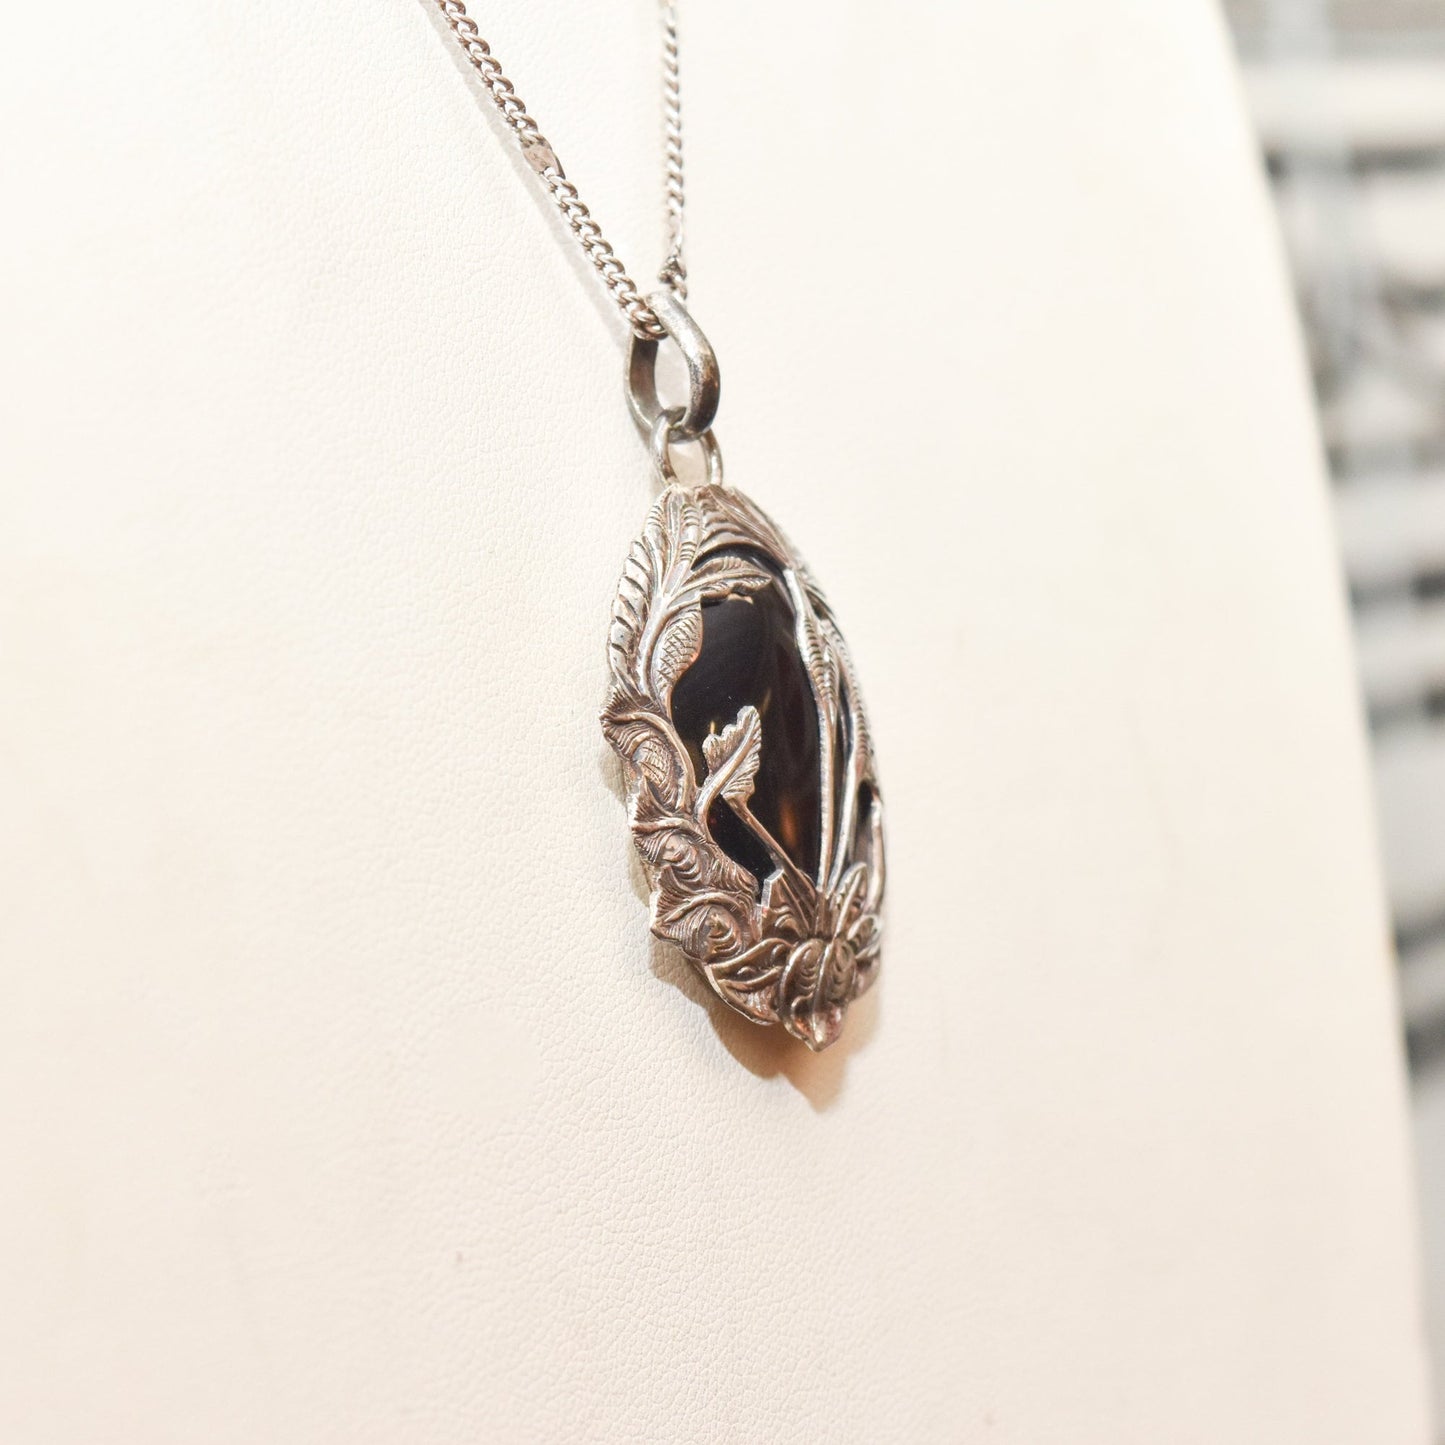 Sterling Silver Black Onyx Pendant Necklace, Beautiful Leaf Motifs, Valentines Day Gift, 30.75" L